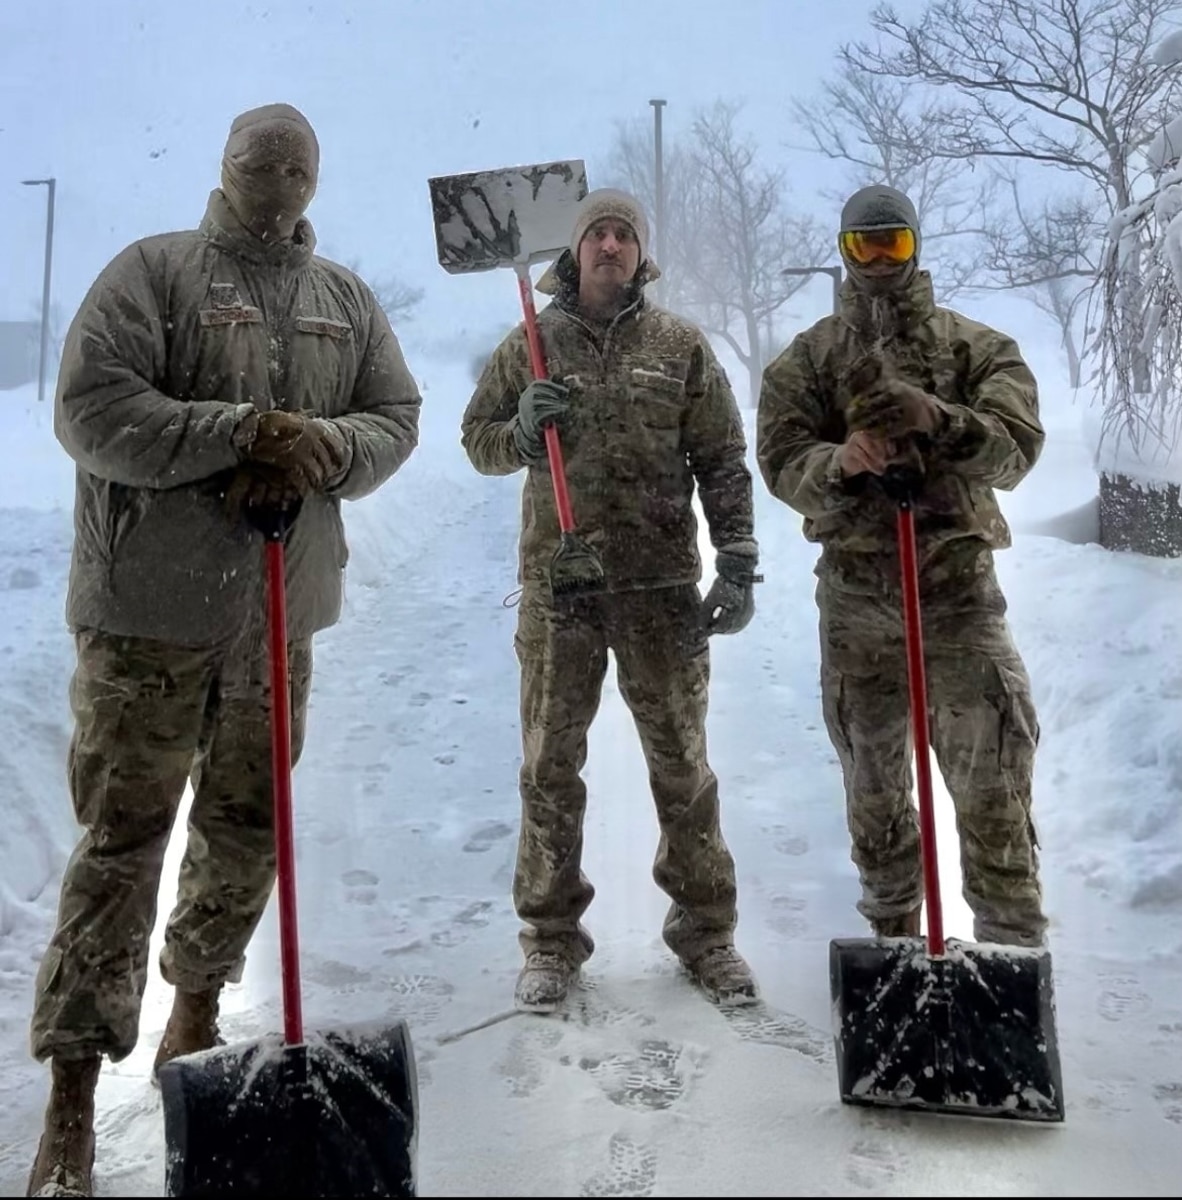 Staff Sgt. Nathan Wojtkowiak, Tech. Sgt. Kevin Pawlukovich and Staff Sgt. Jacob Qualiana, assigned to the 107th Attack Wing, pause from keeping entrances clear at Erie Community South Campus warming station in Orchard Park, New York, Jan. 15, 2024. Seasonally activated warming stations established around Western New York provide stranded and homeless civilians refuge from extreme winter conditions.